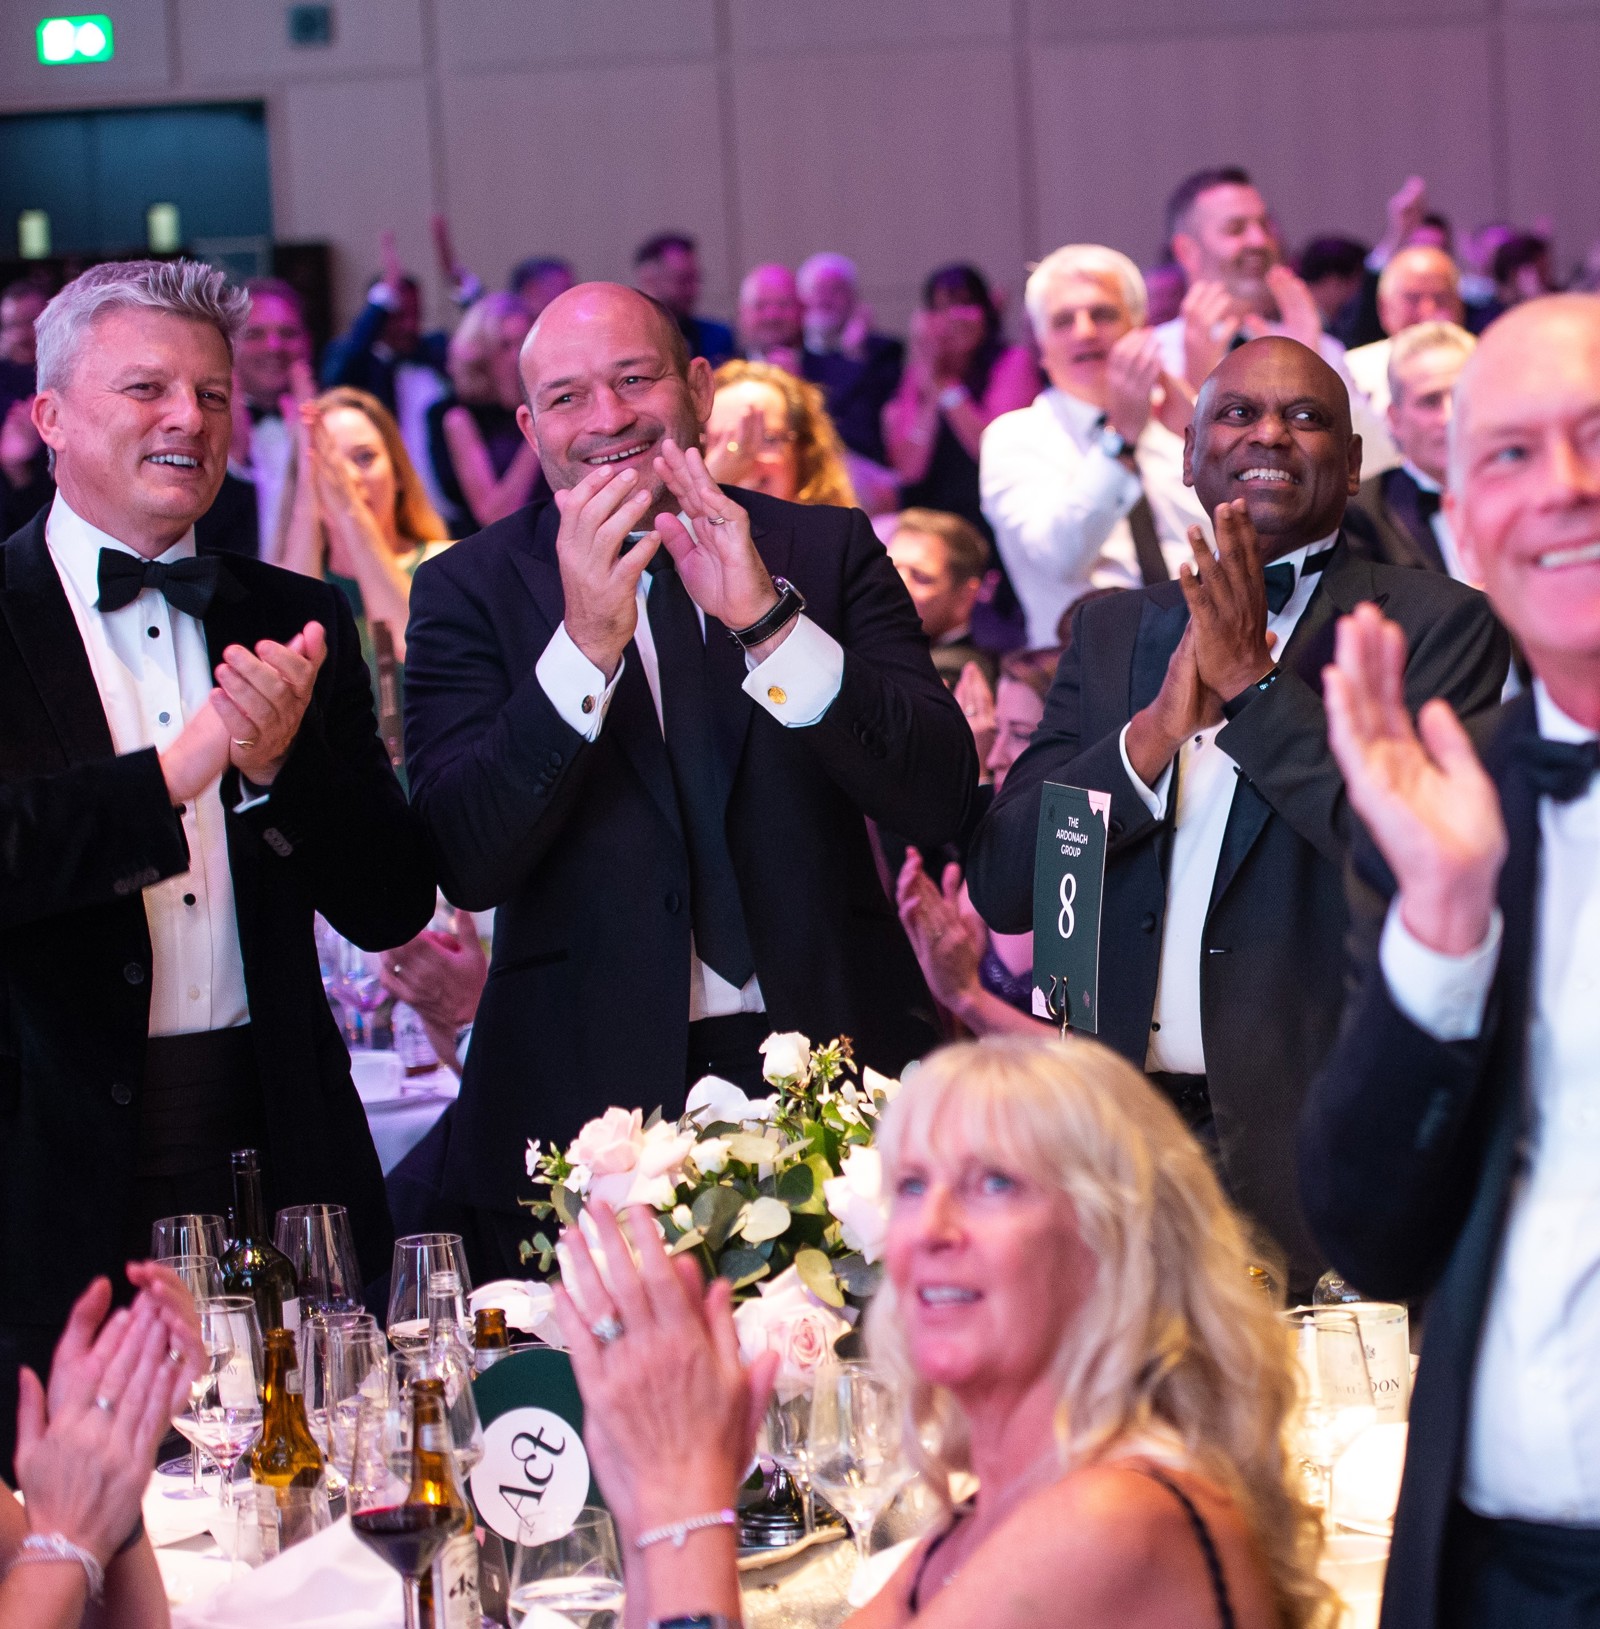 ACT Gala Dinner Guests Stood And Clapping